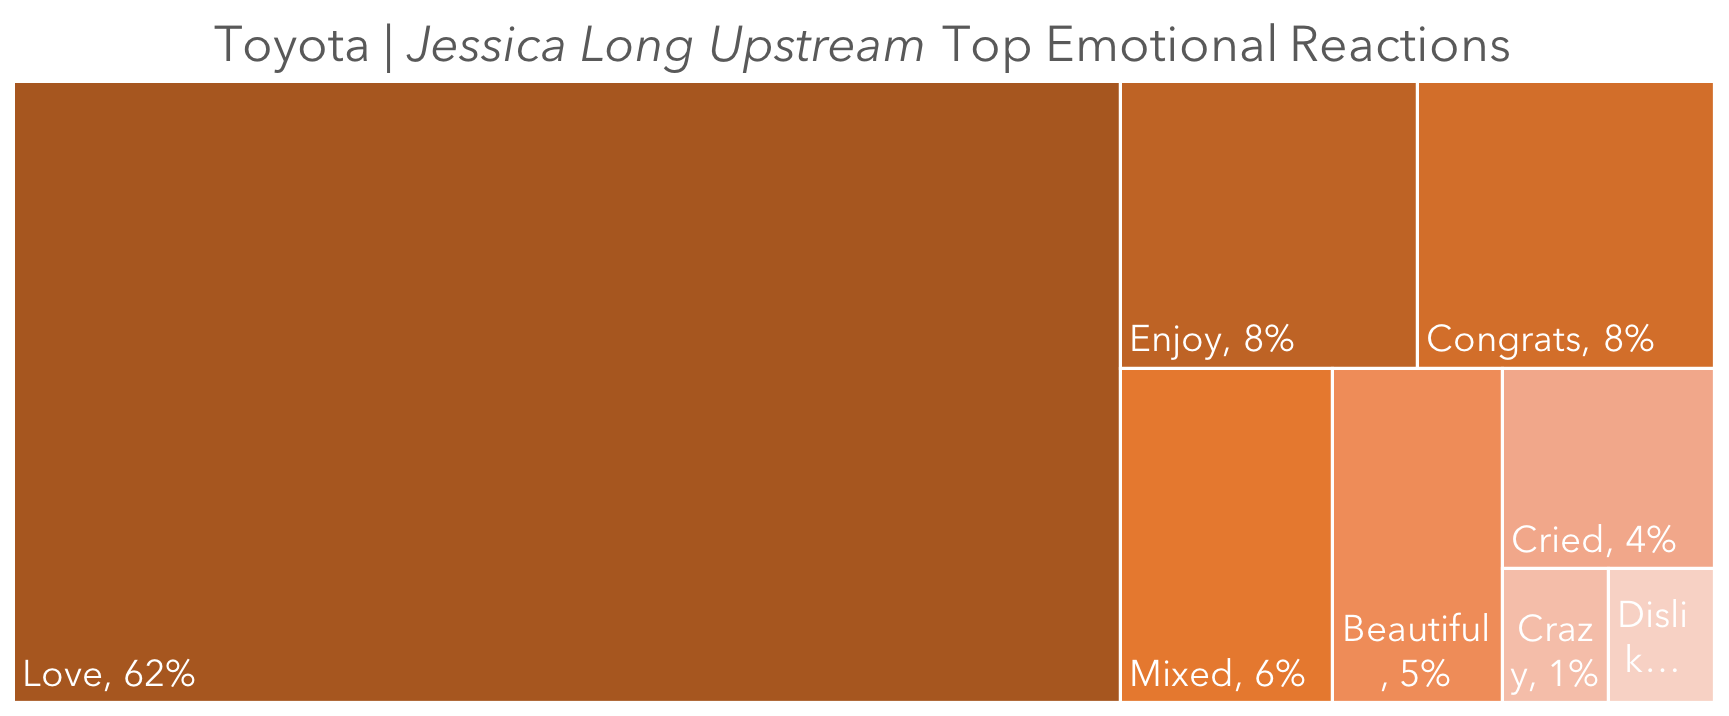 Source: Top Emotional Reactions, Toyota Jessica Long Upstream on YouTube